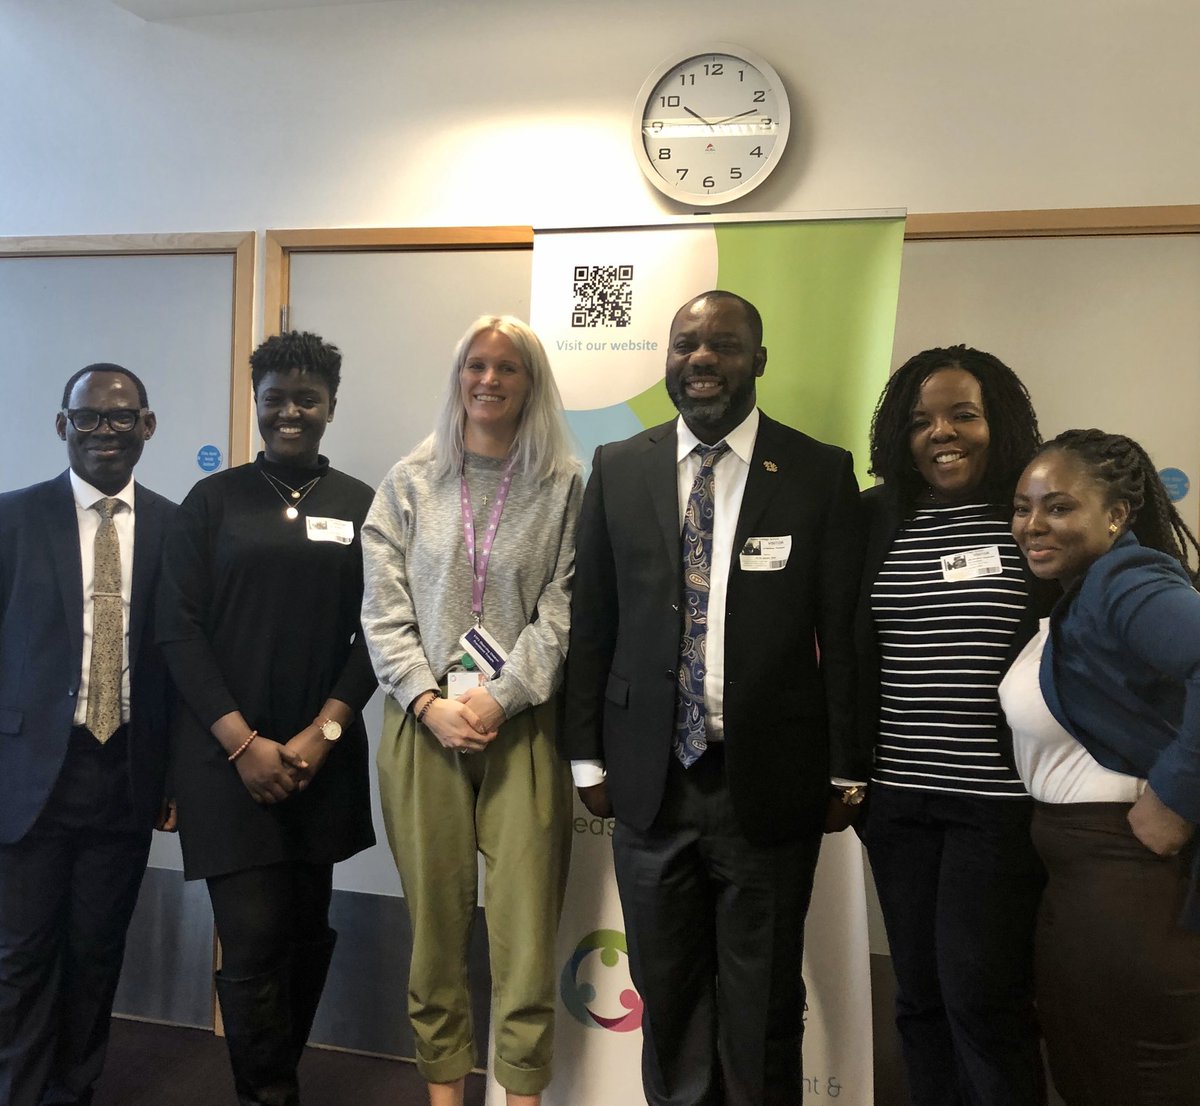 A privilege to celebrate #InternationalDayofEducation with @MatthewOPrempeh Minister of Education for Ghana @SwissCottageSch. Great discussions on the role of education for inclusive societies #PowerOfPartnership